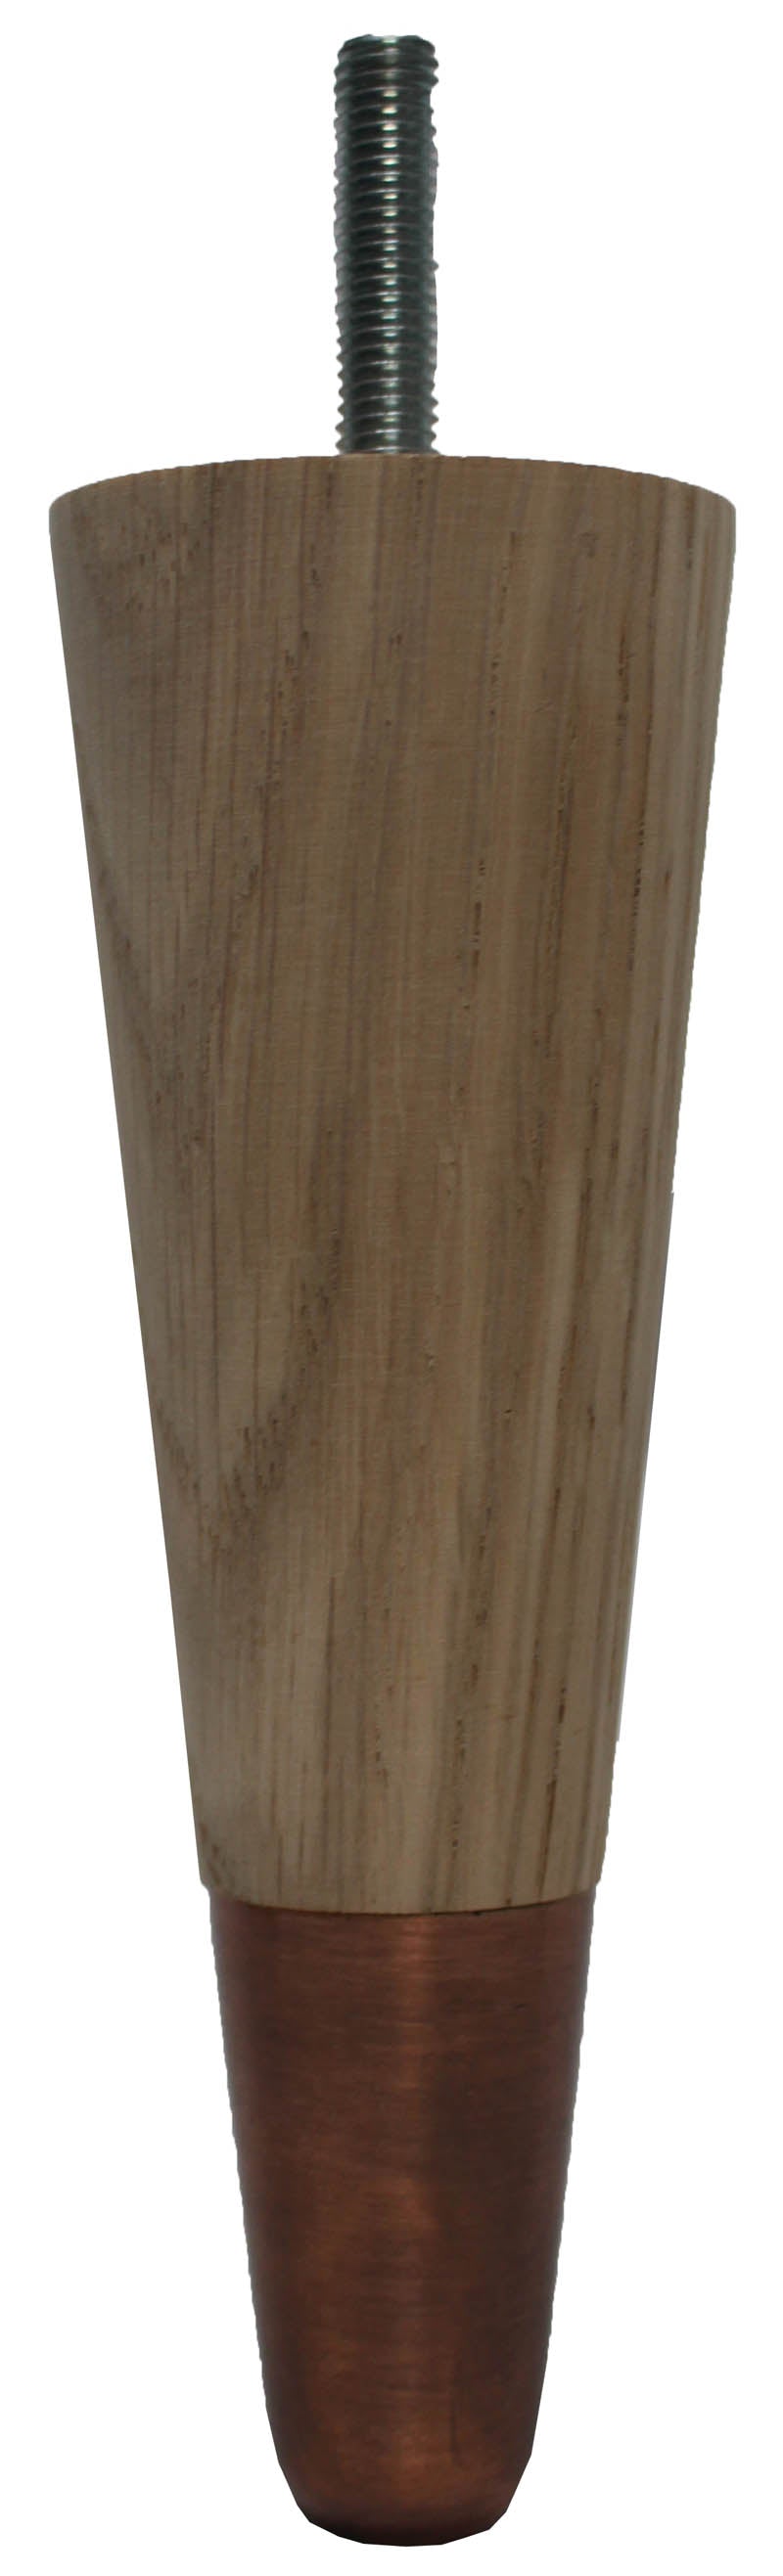 Heather Solid Oak Tapered Furniture Legs - Raw Finish - Oiled Bronze Slipper Cups - Set of 4